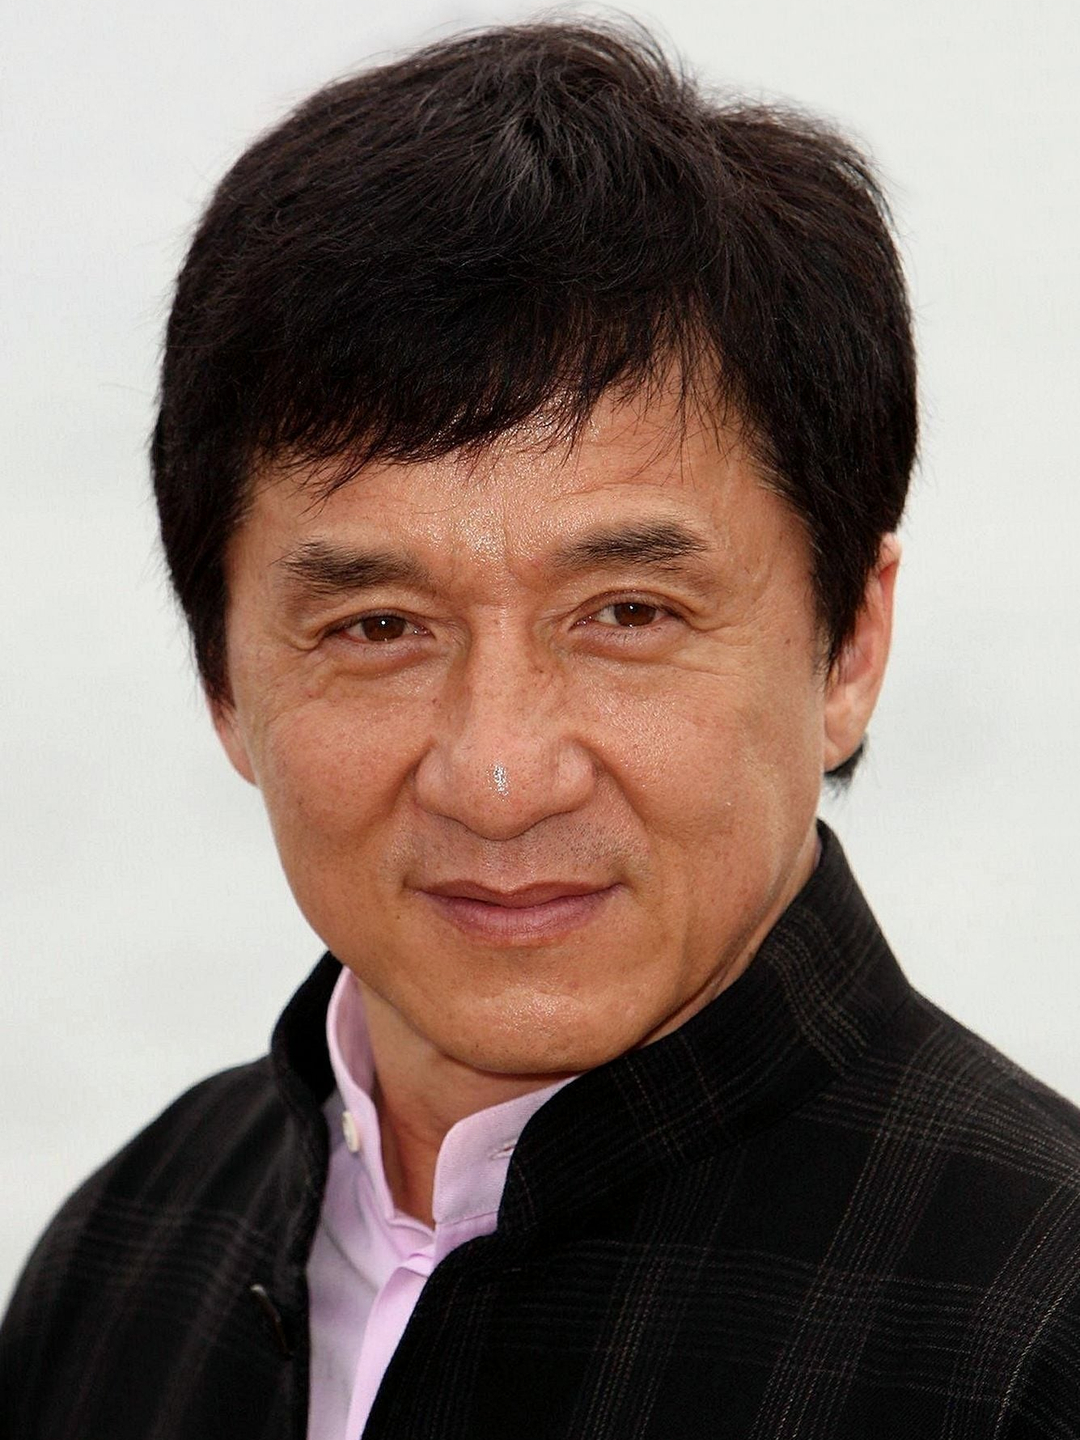 Jackie Chan current look